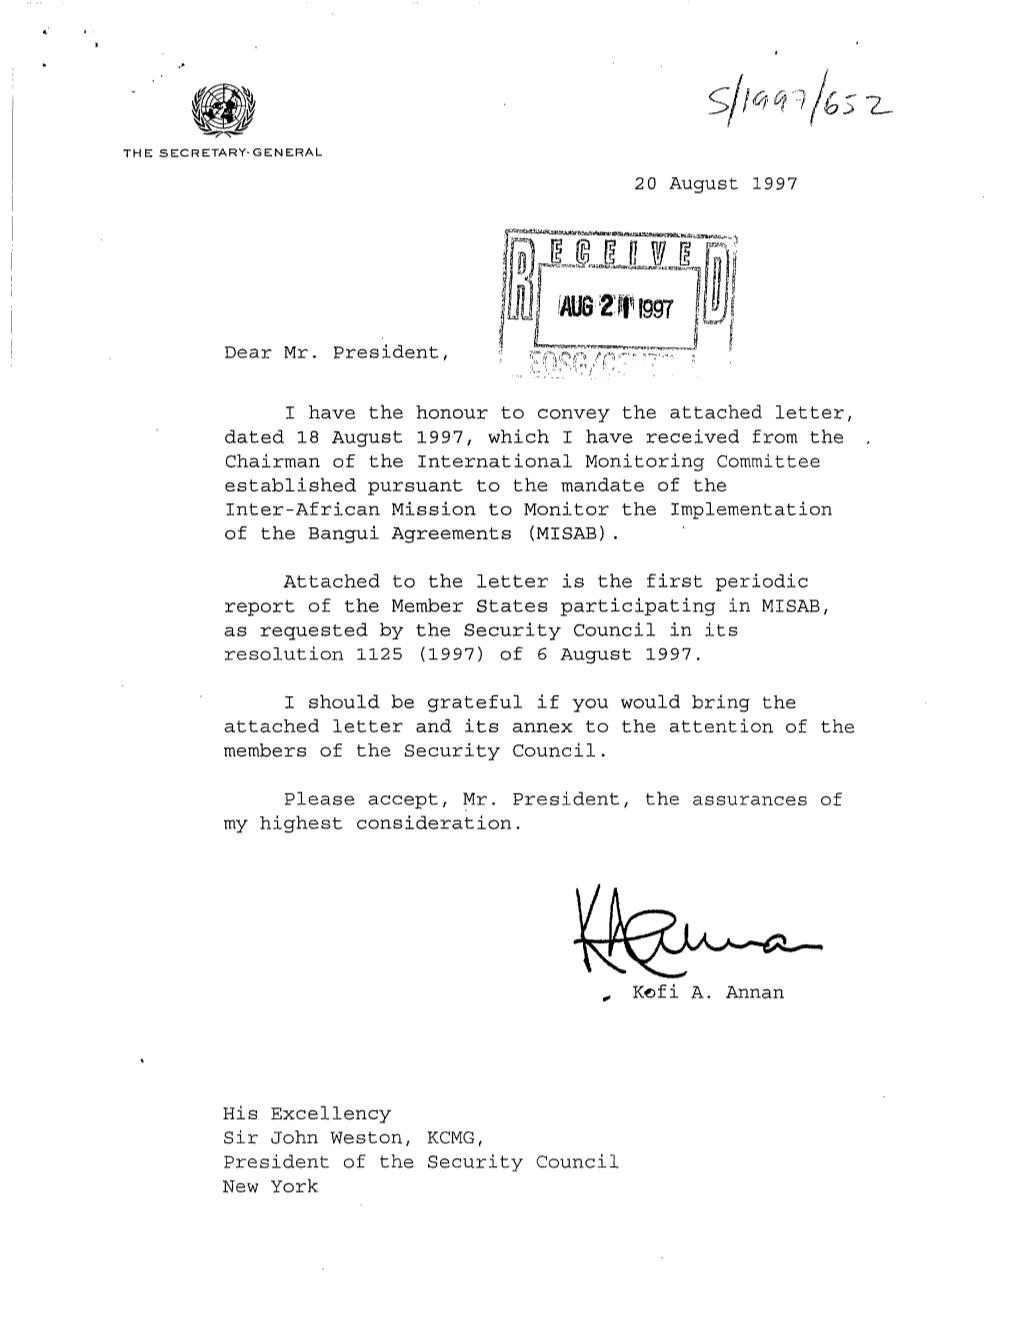 20 August 1997 Dear Mr. President, I Have the Honour to Convey The